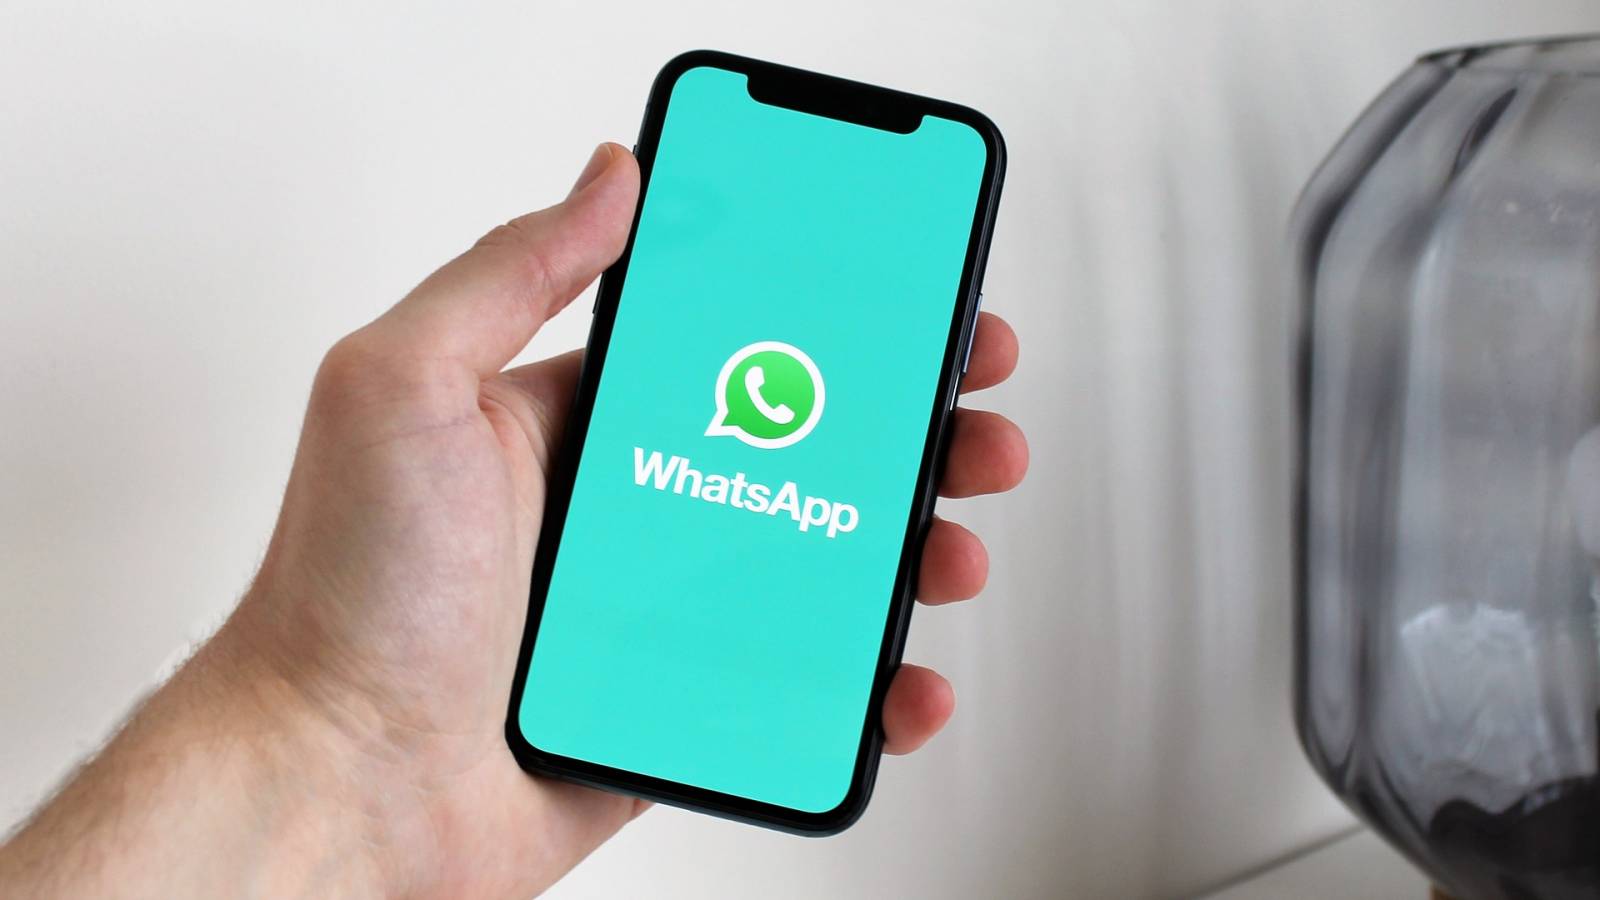 WhatsApp Official Announcement Shows the Future of the Application Billions of People